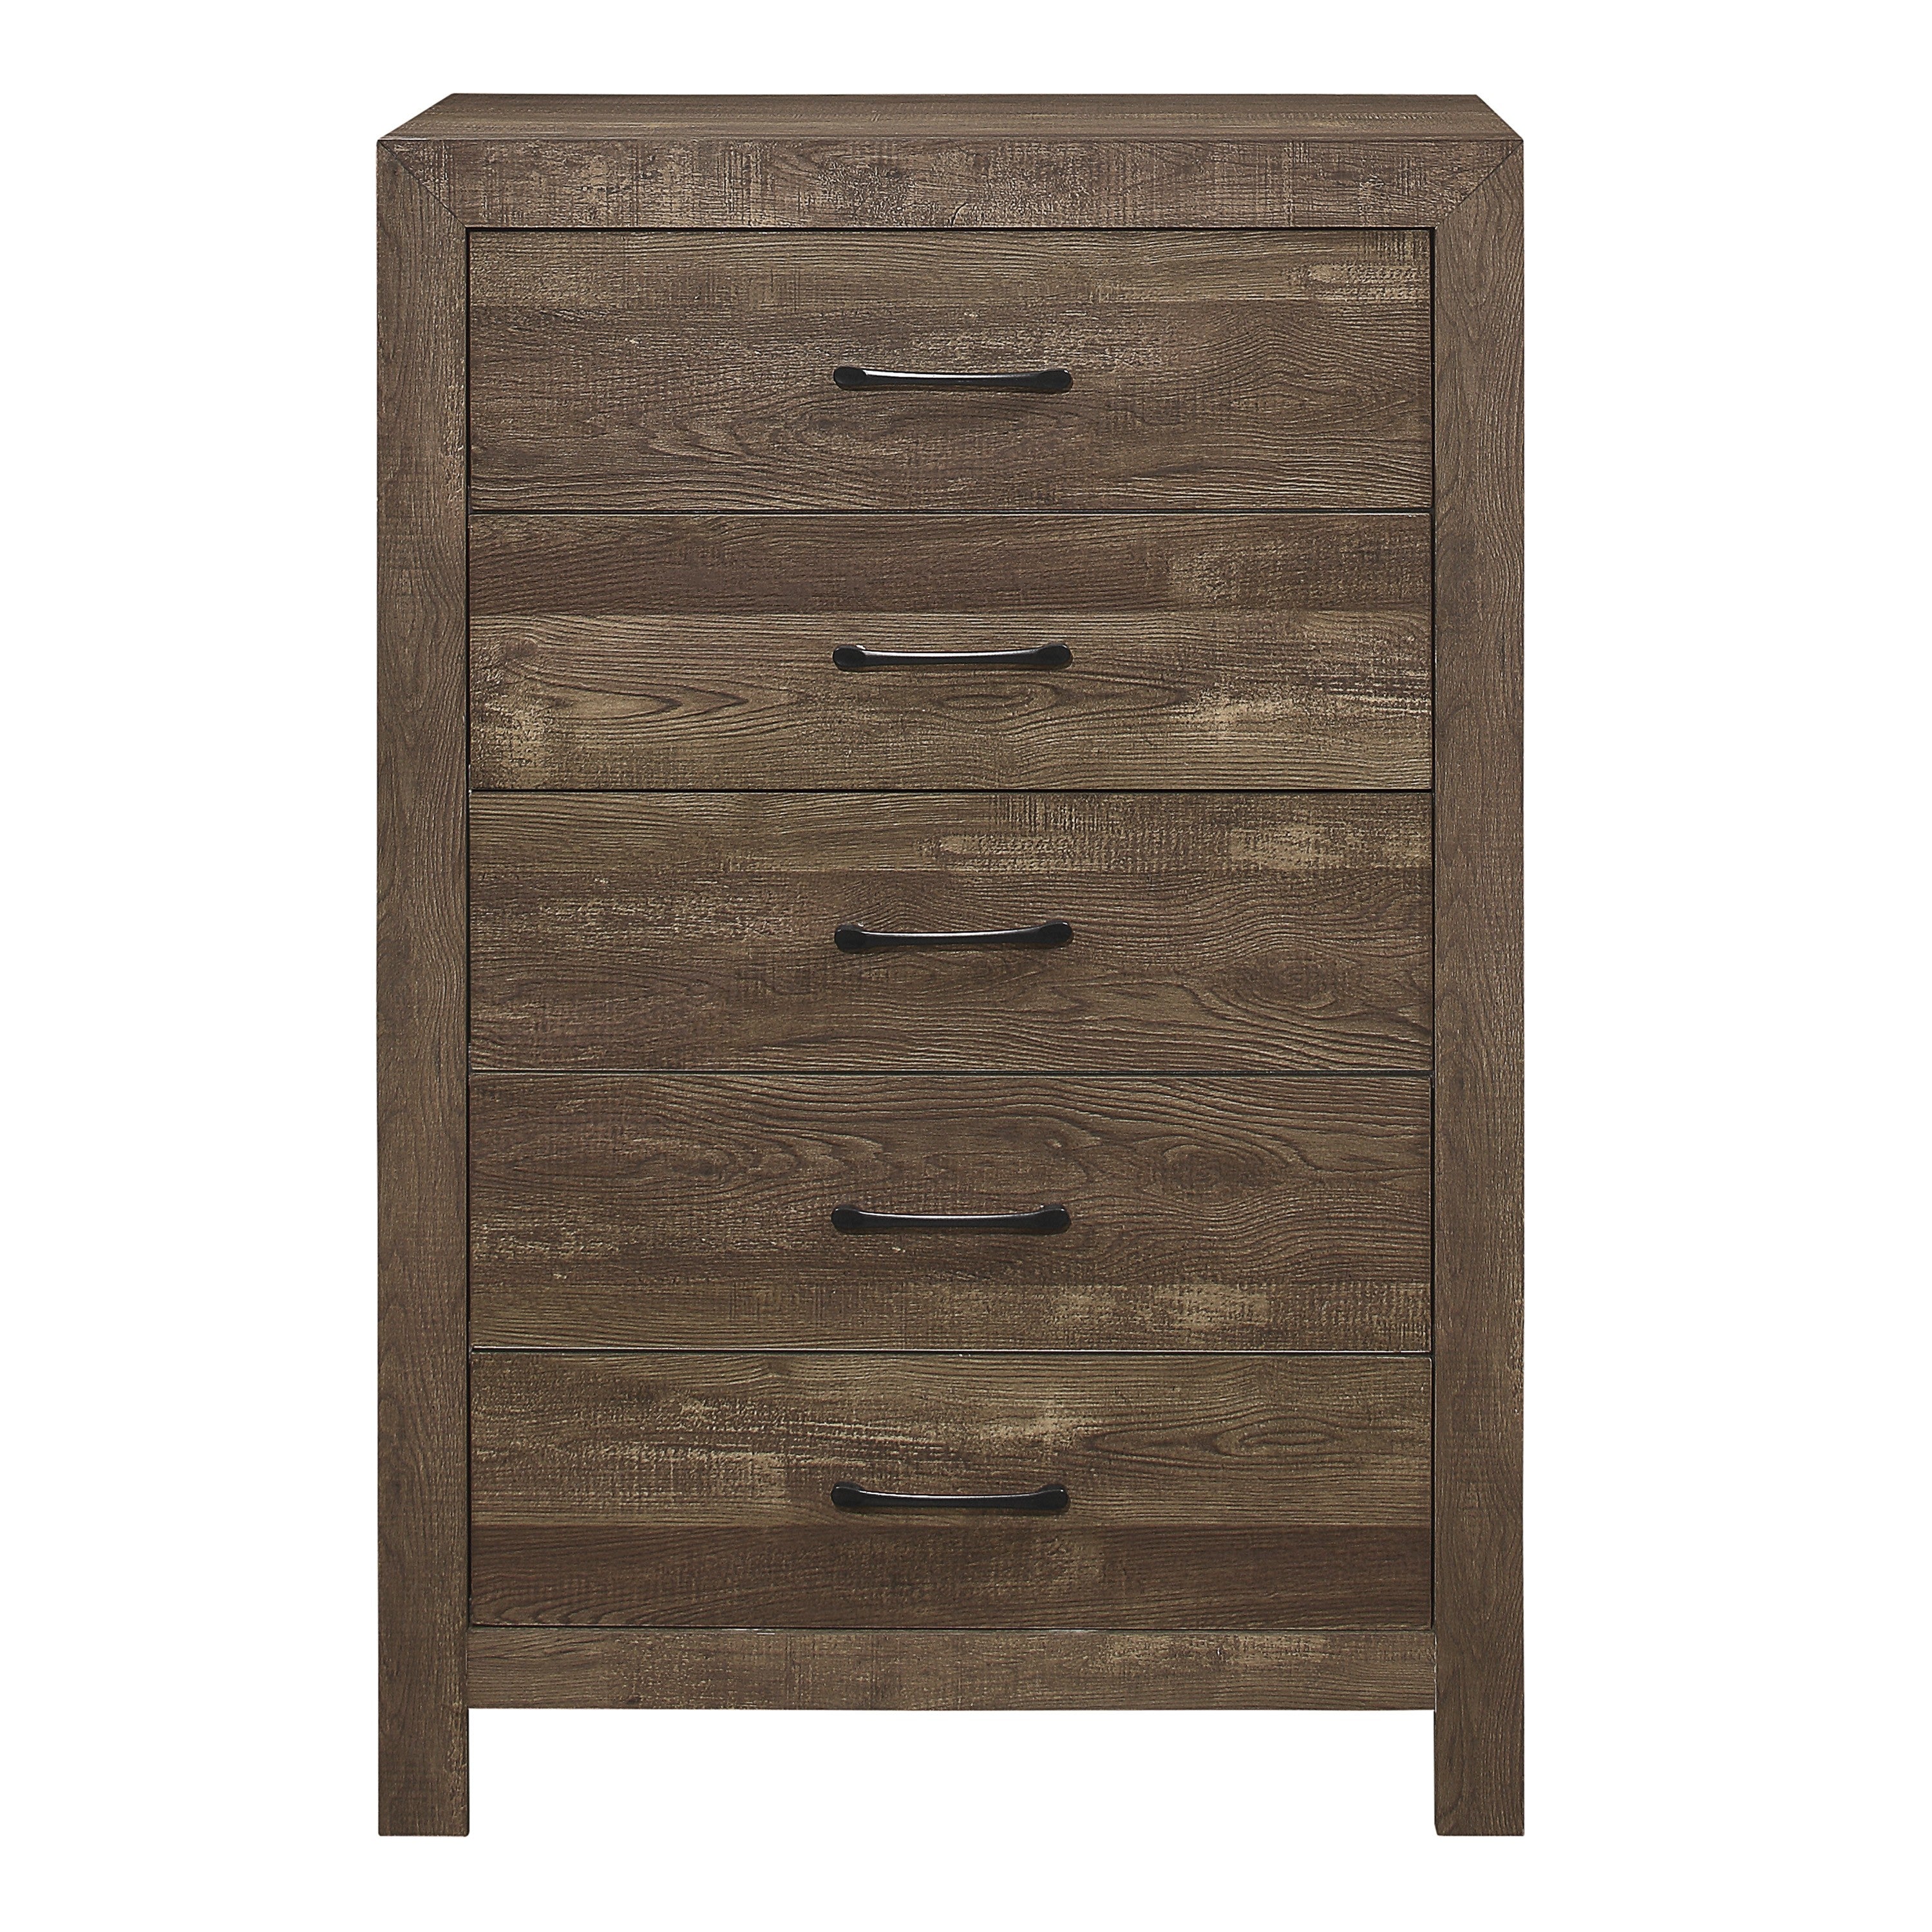 Rustic Brown Corbin chest that includes 5 storage drawers.